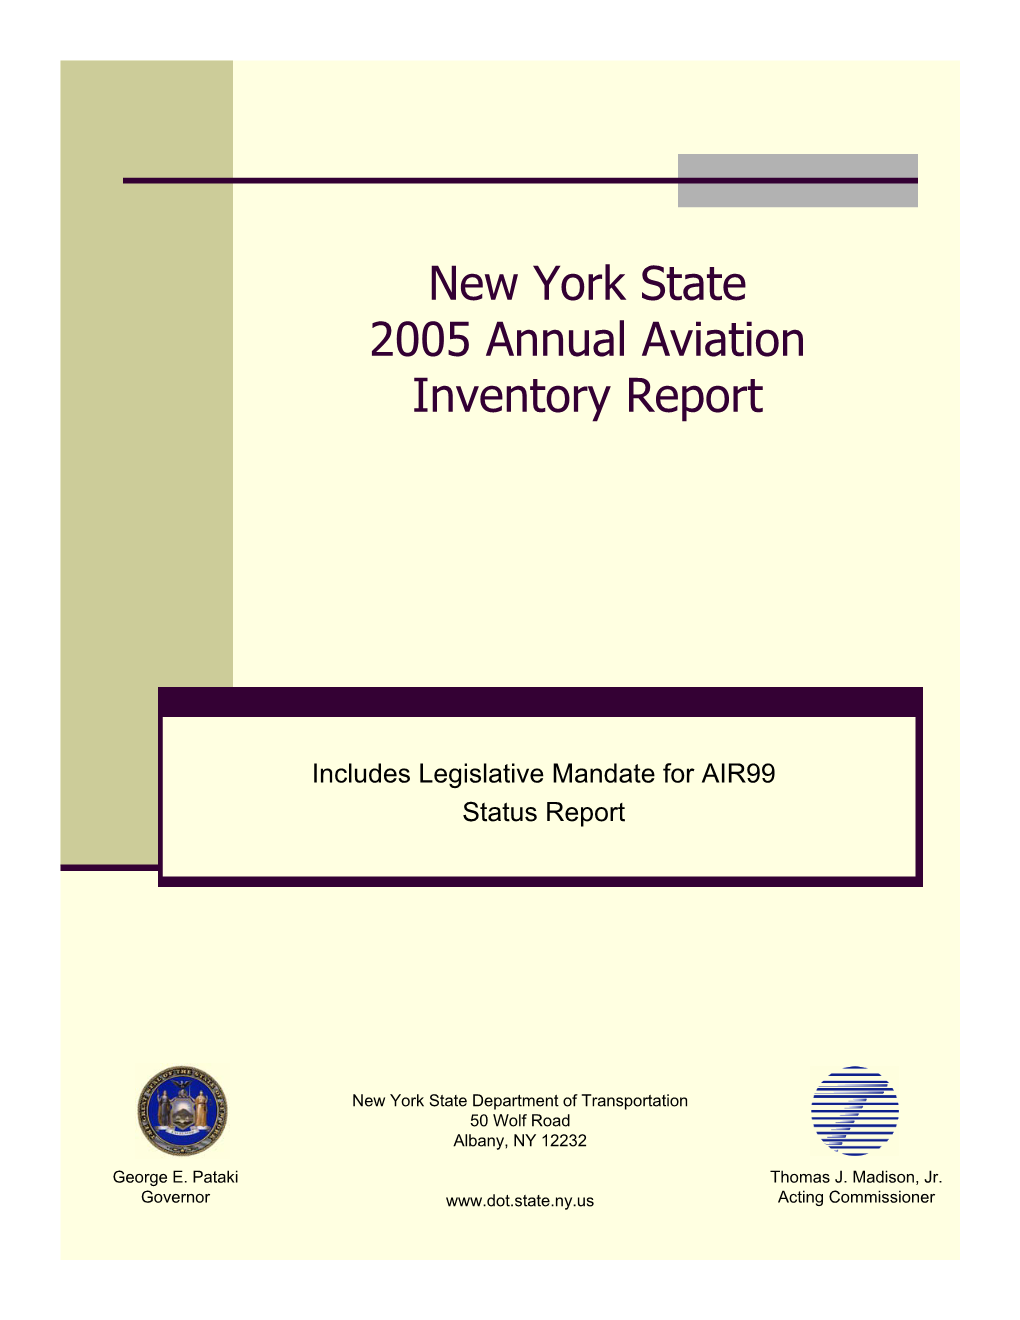 New York State 2005 Annual Aviation Inventory Report